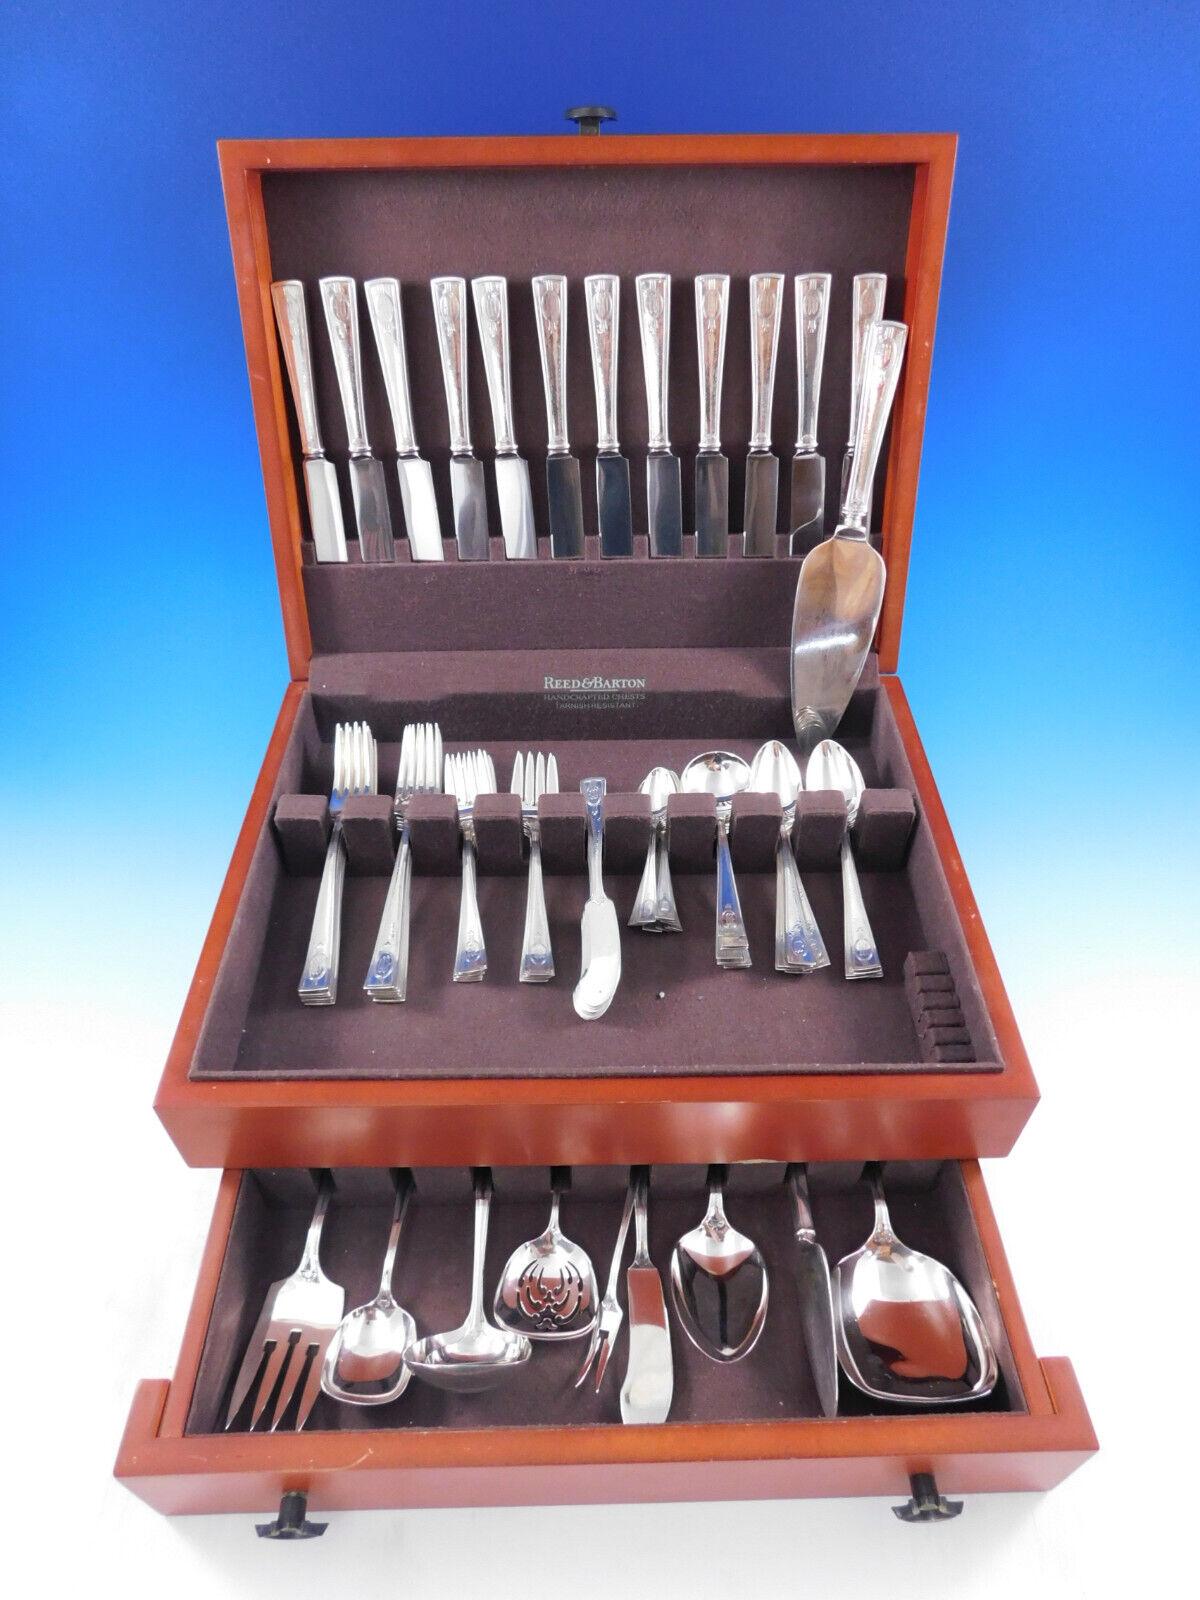 Arts & Crafts Carthage by Wallace sterling silver Flatware set with subtle hand hammered finish - 95 pieces. This set includes:


12 Regular Knives with blunt stainless blades, 8 1/2